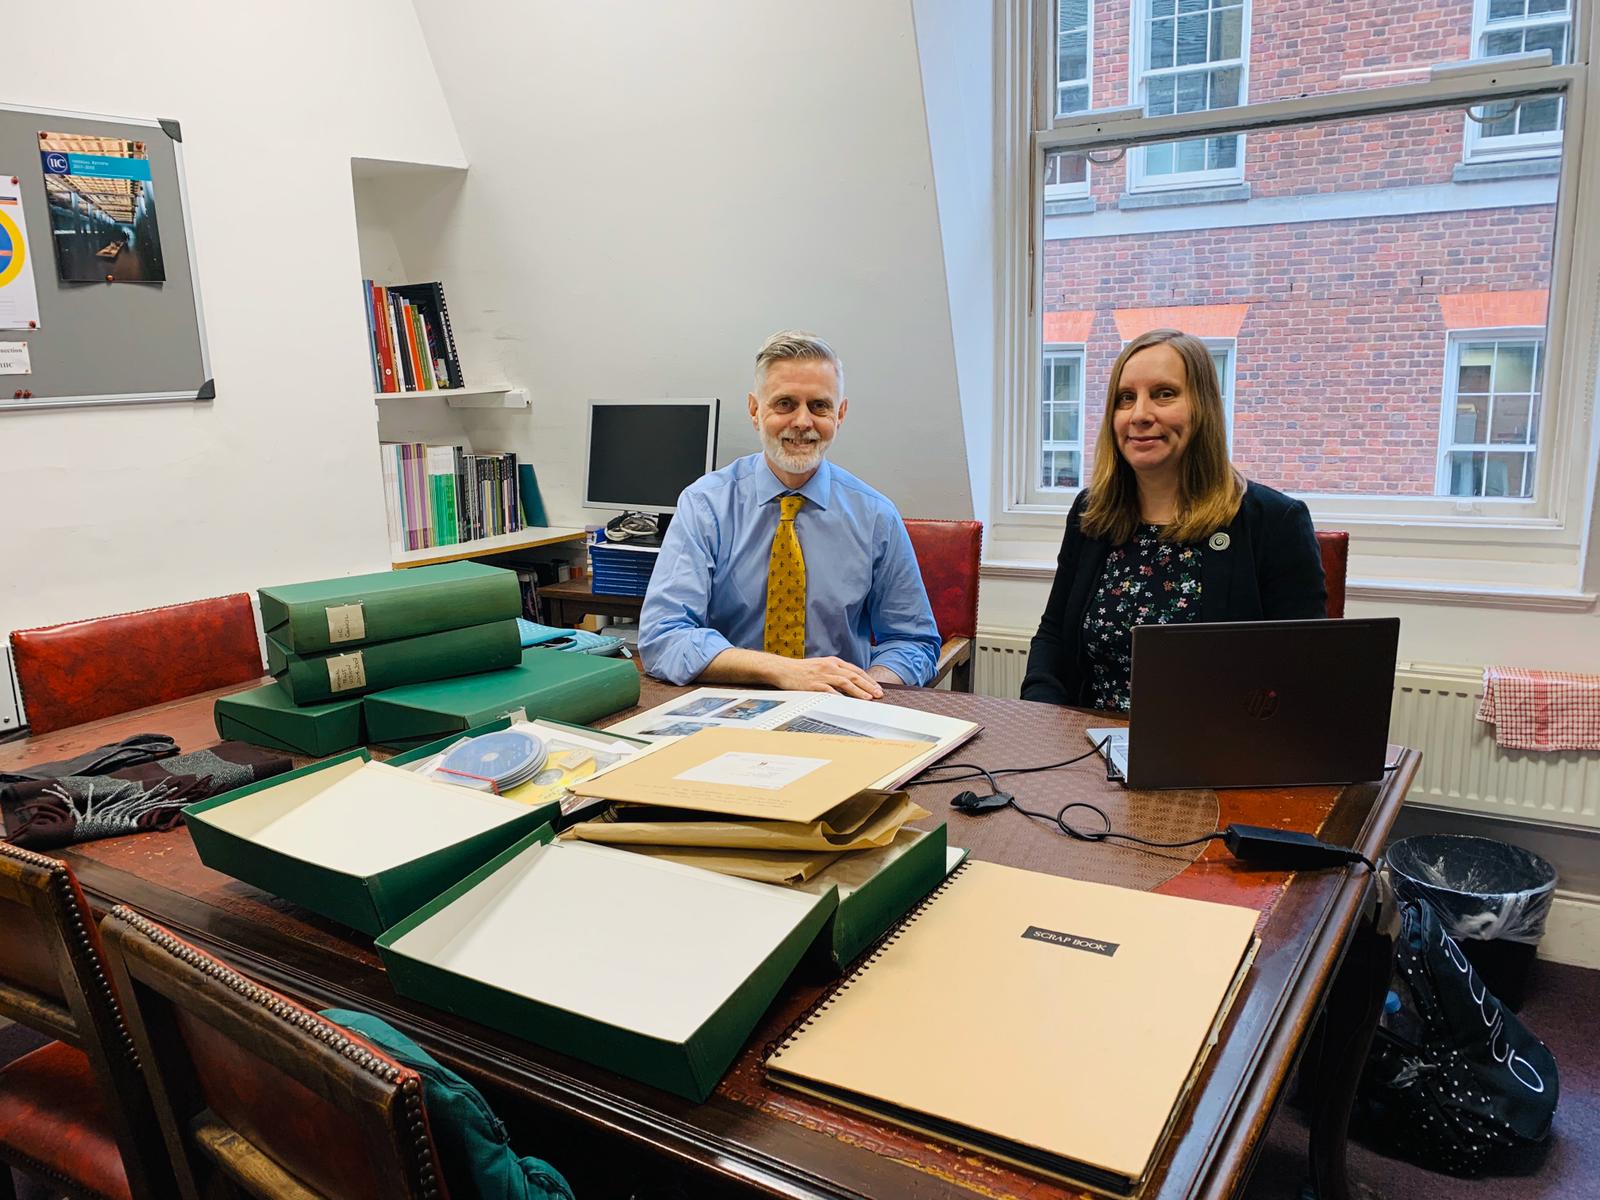 Graham Voce and Ellie Pridgeon surveying records in the IIC Office, London. Image by Tina Churcher, courtesy of the International Institute for Conservation of Historic and Artistic Works.